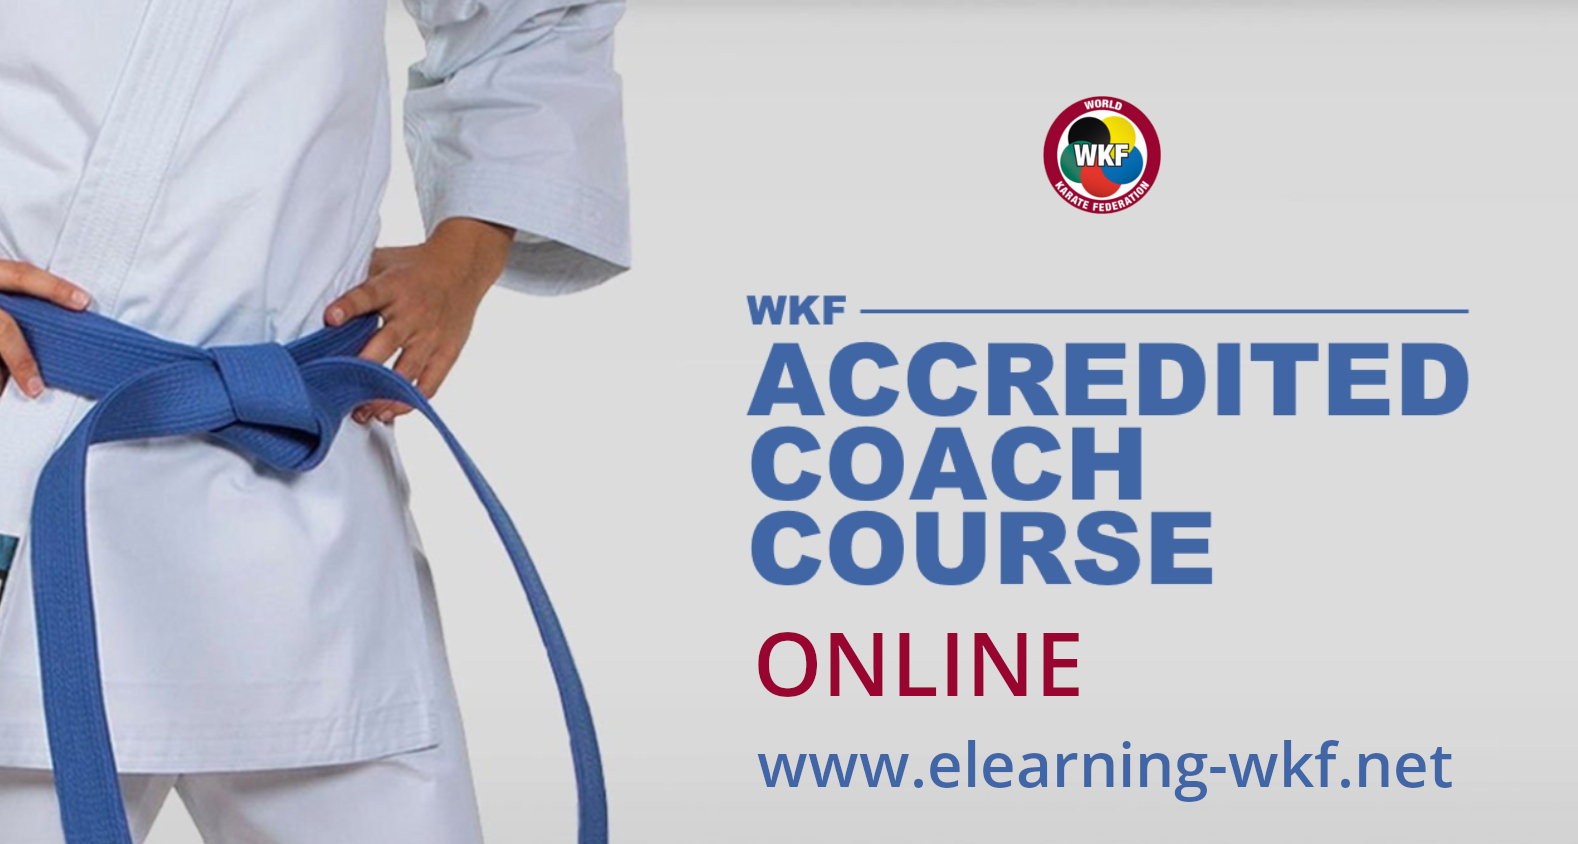 WKF Accredited Coach Course